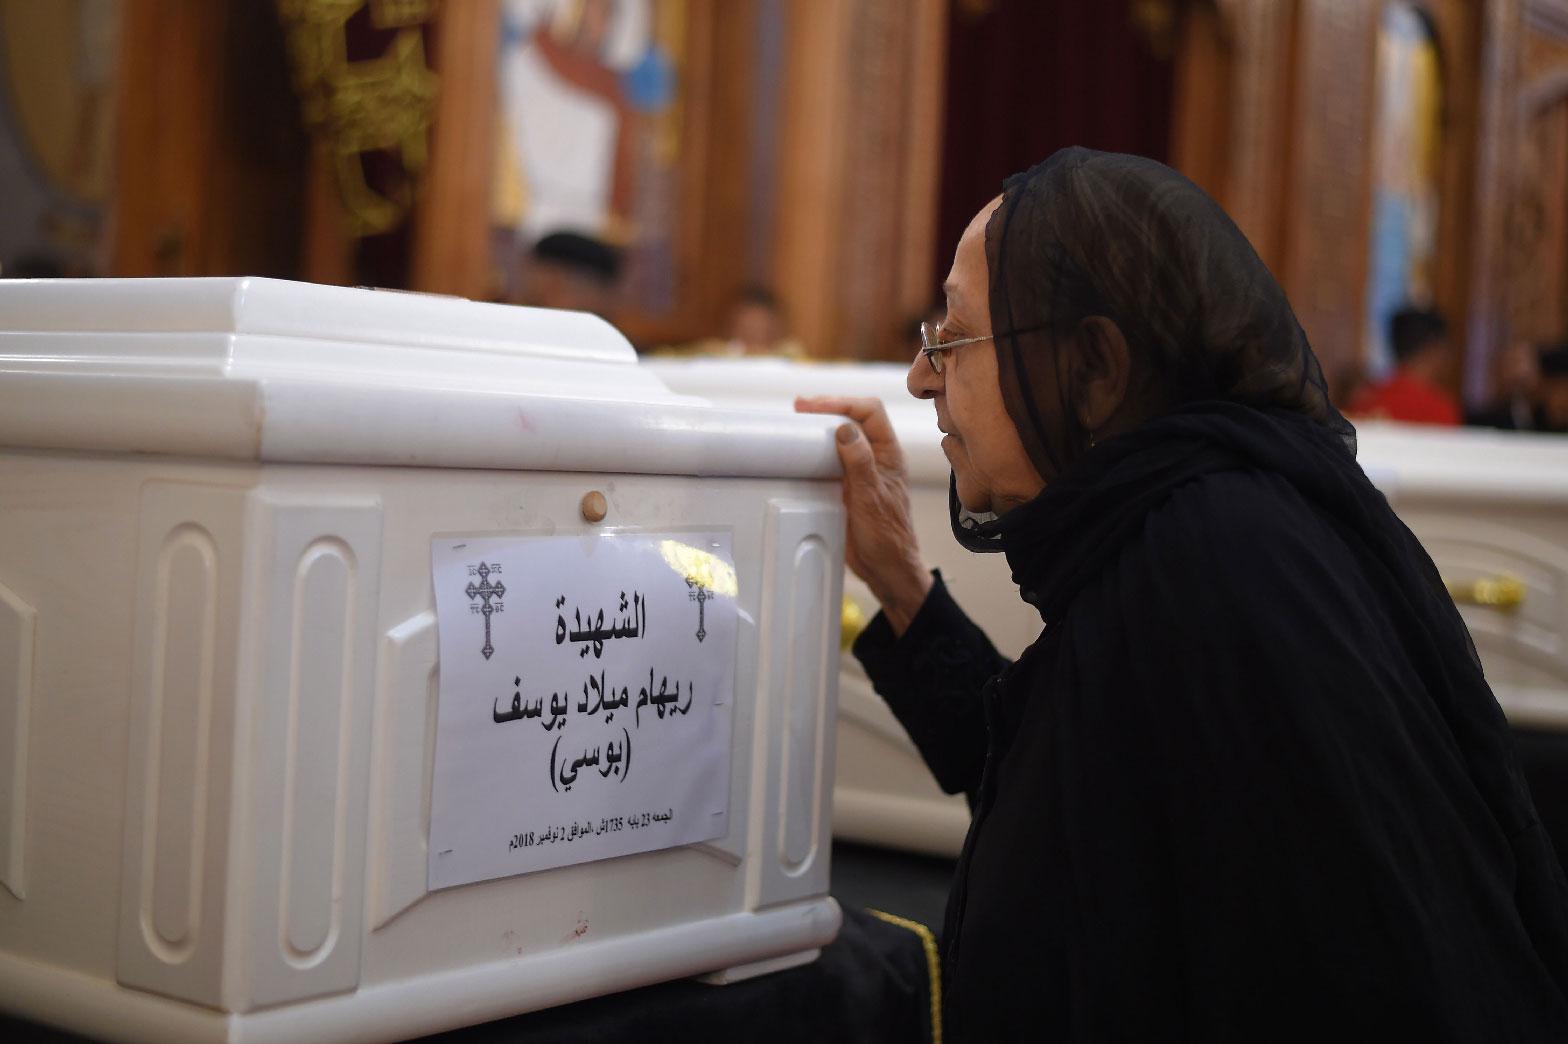 A relative of a slain Christian grieves during funeral service in Minya, Egypt.